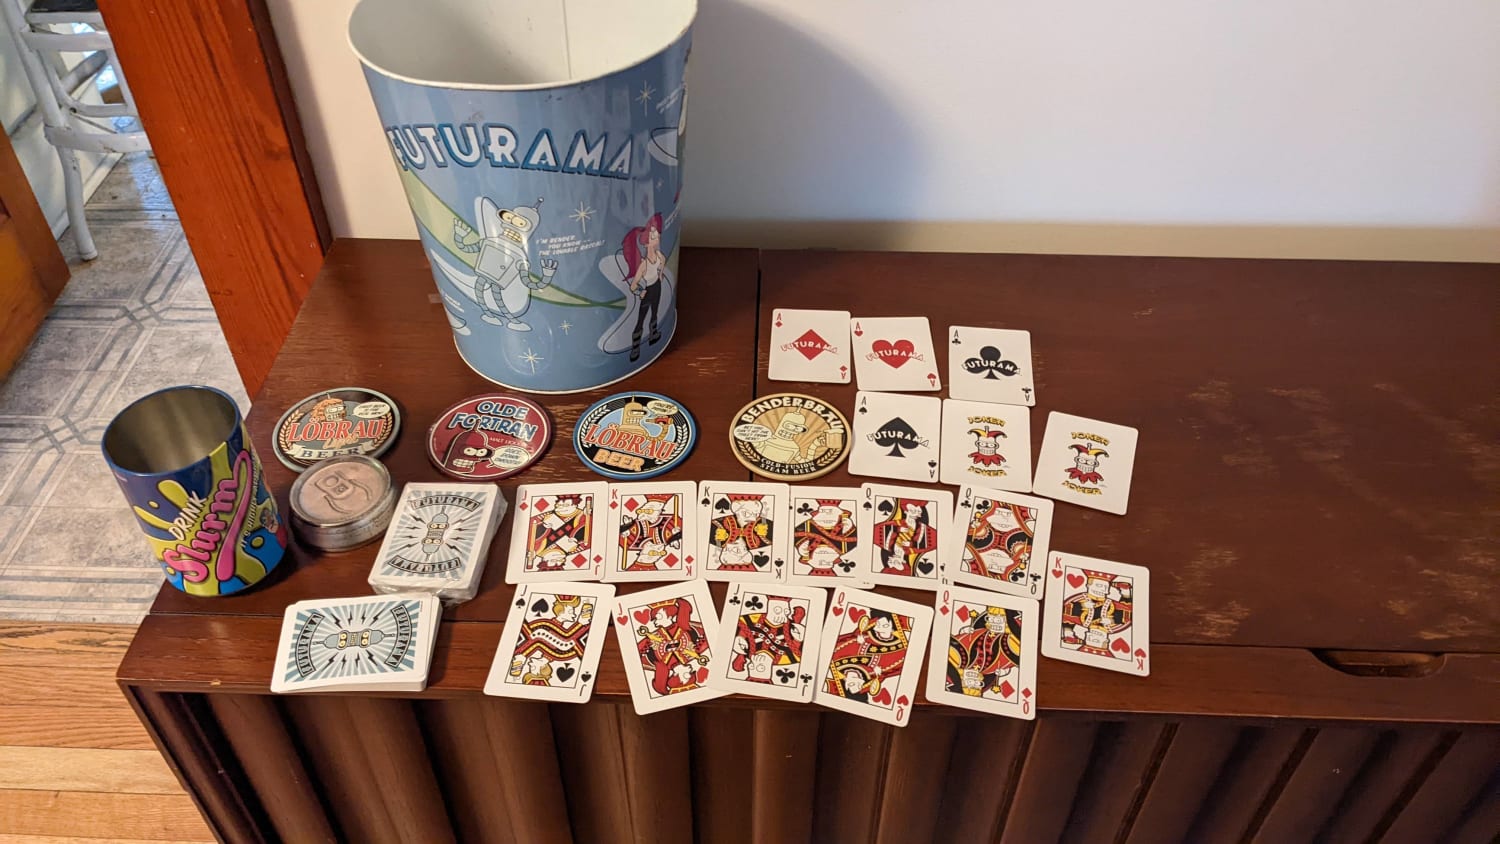 I see the can with playing cards a few days ago, and I raise you my collection!